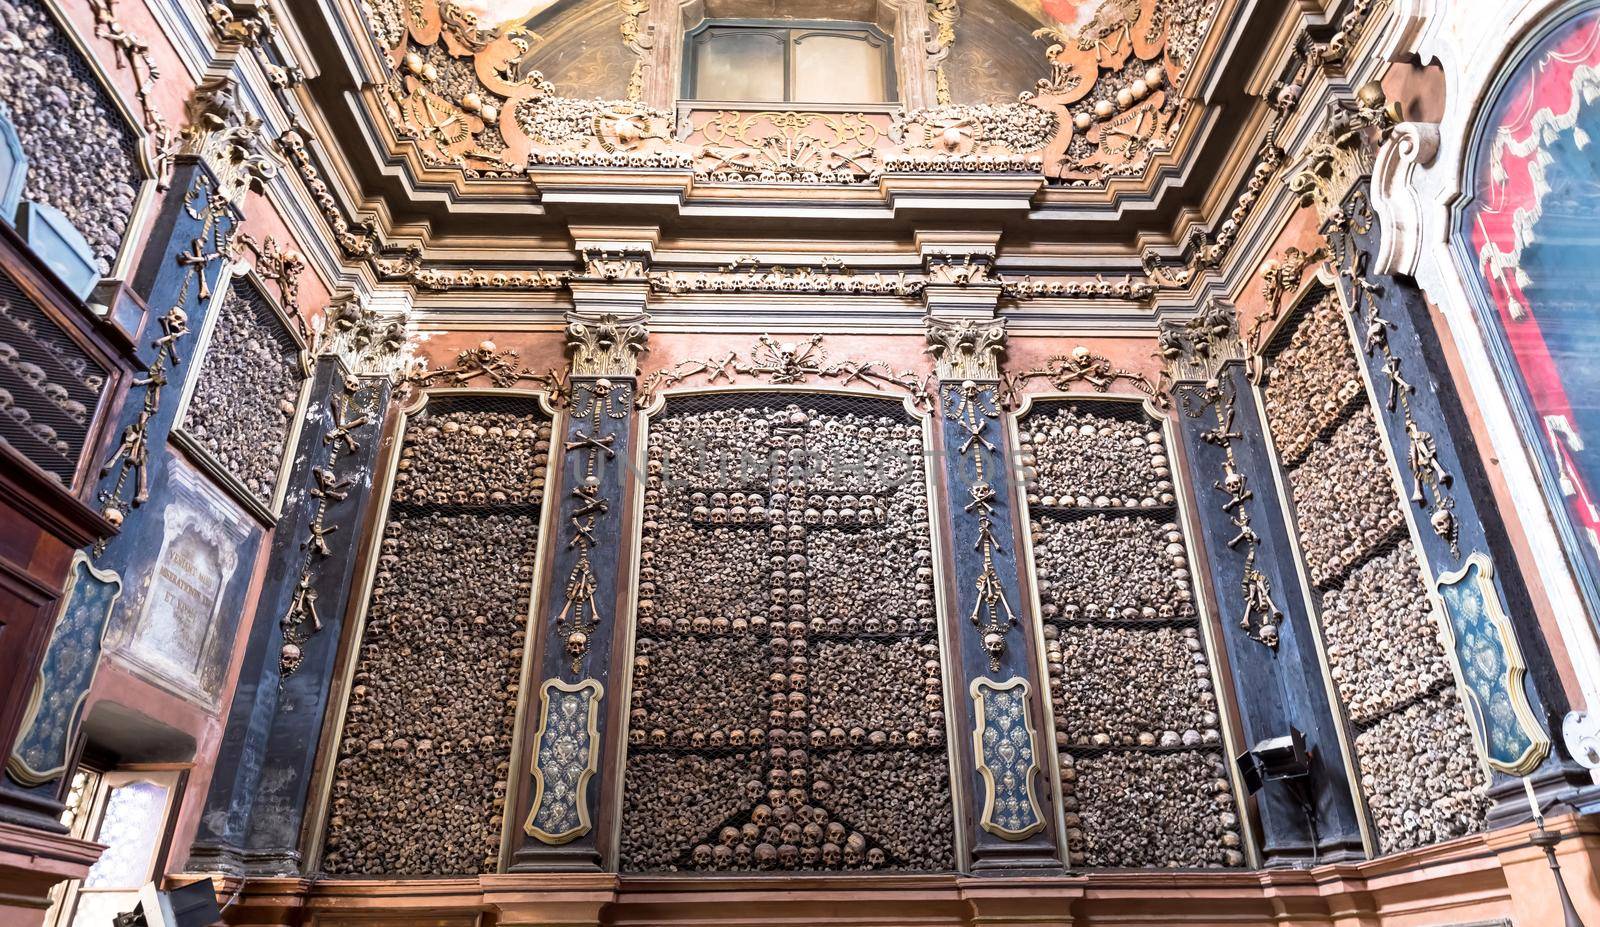 Milan, Italy - Circa August 2020. Ossuary Chapel in San Bernardino alle Ossa Church. Every architectural detail is clad in human bones.